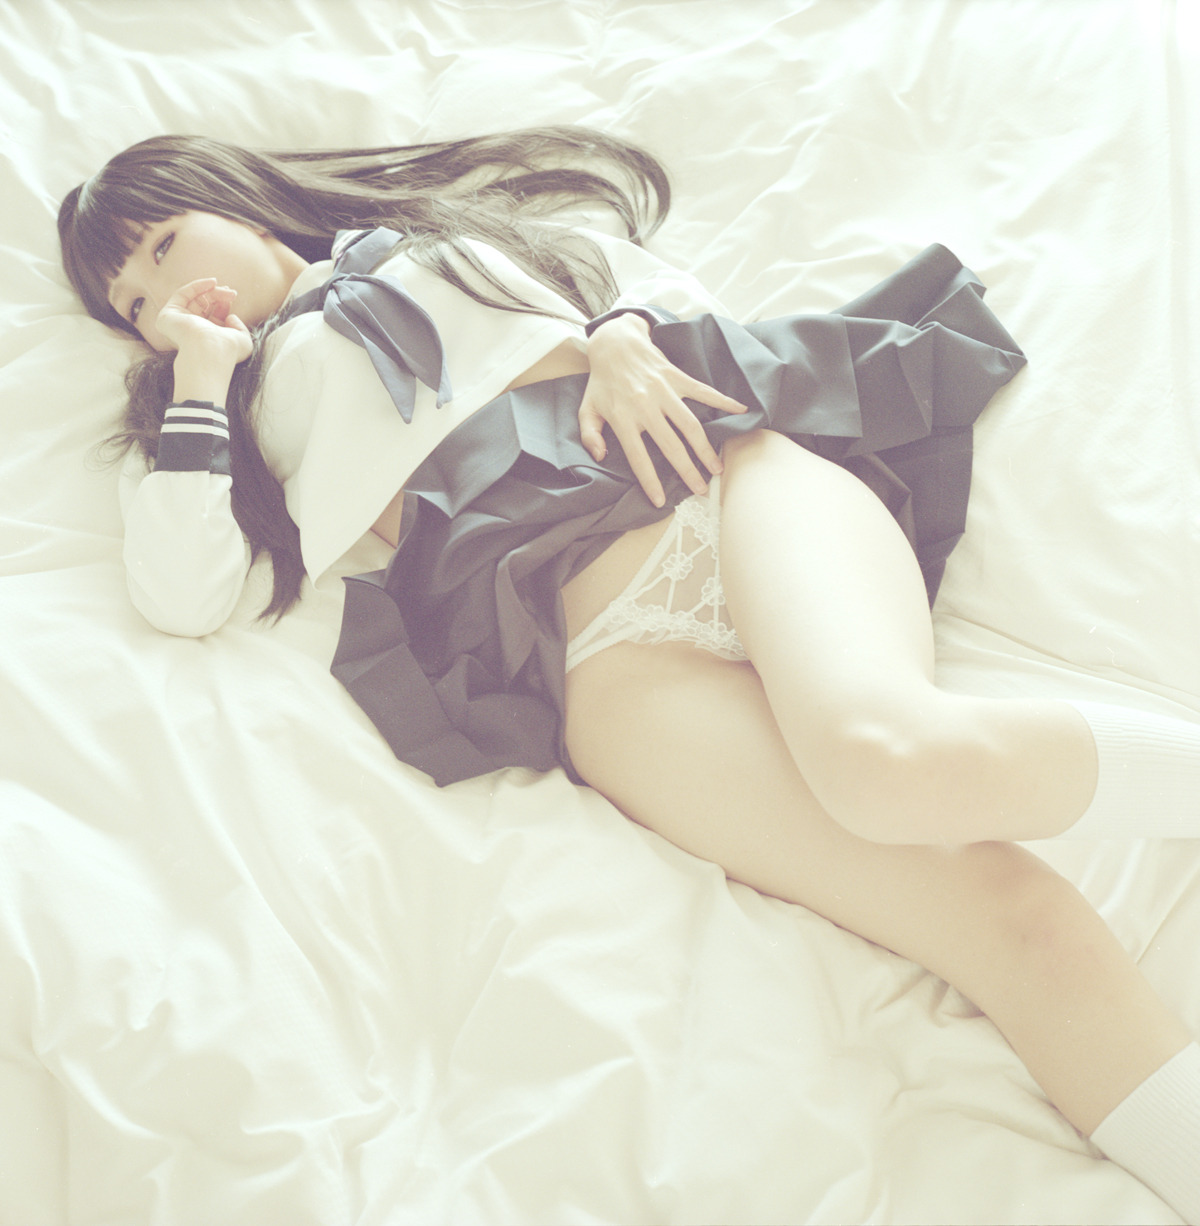 hot-cosplay:  Awesome body School Girl Cosplay Set 135 PICS / 89.7 MB DOWNLOAD http://uploaded.net/file/nlq9ncrs/